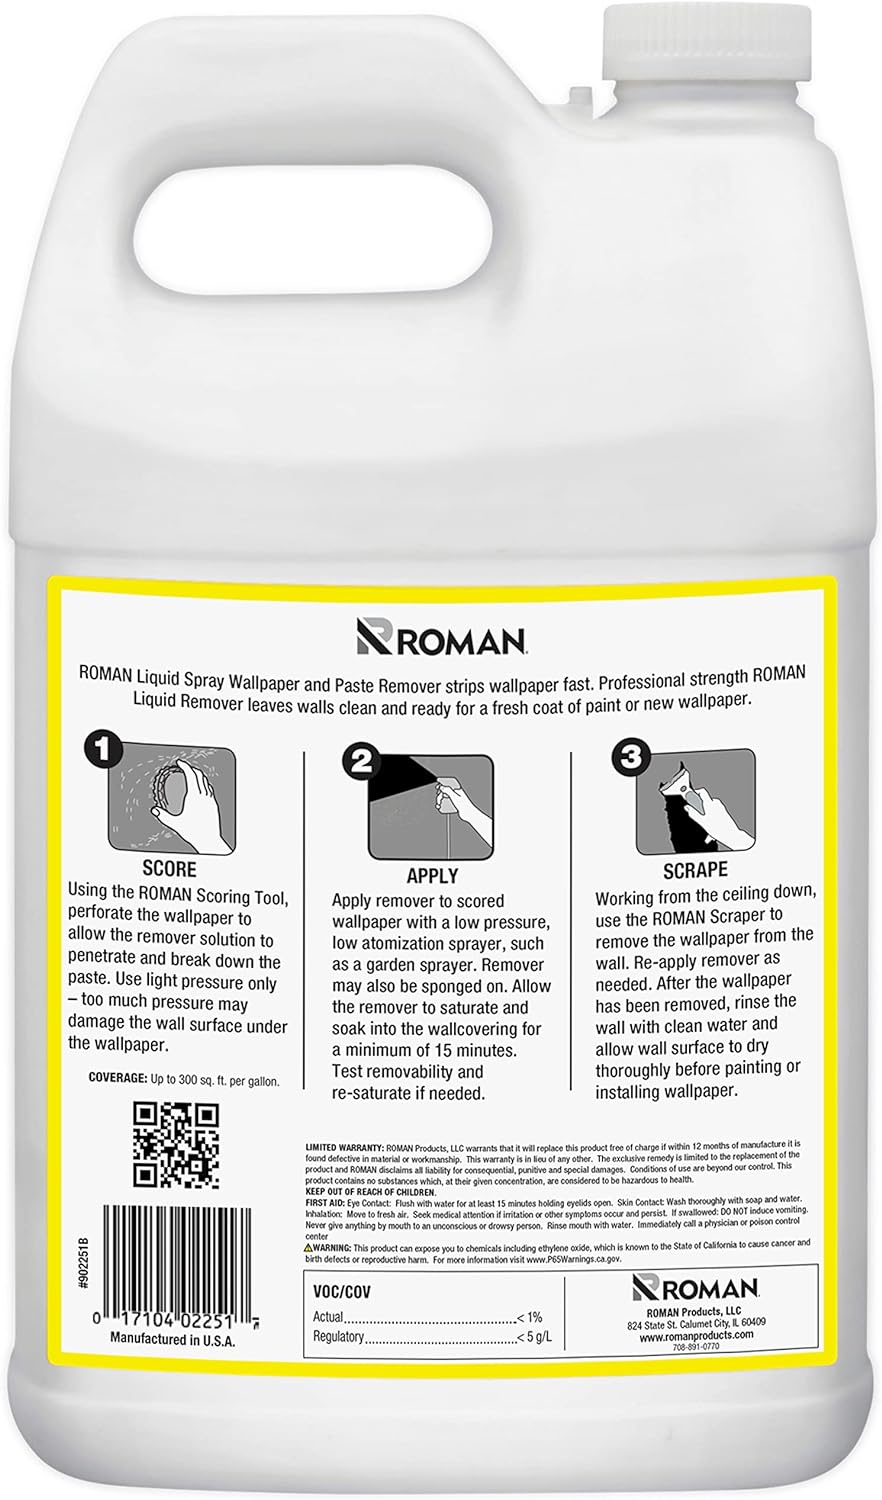 Roman Wallpaper Remover Liquid Spray, Contractor Strength Wallpaper Stripper and Adhesive Remover, Unscented, Non-Staining, Clear, PRO-496 (1 Gallon, 300 Sq. Ft.)